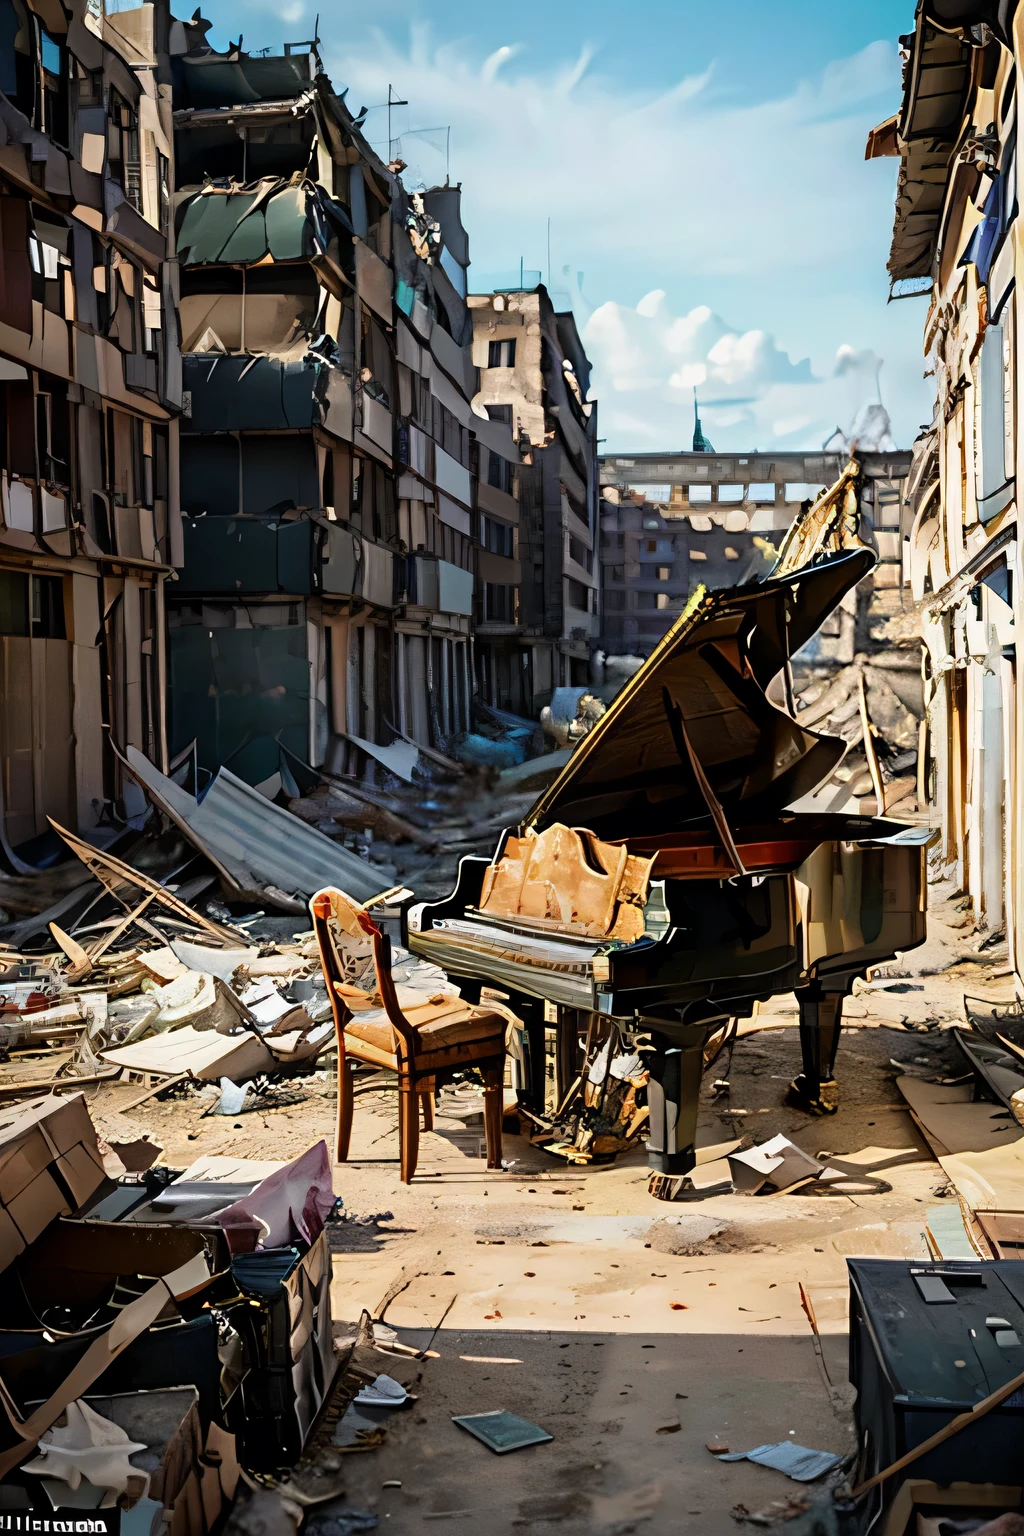 In the midst of the devastation of war-torn Berlin, there stood a grand piano, miraculously untouched amidst the rubble. This piano had once belonged to a renowned pianist who had fled the city at the outbreak of the war, leaving behind his beloved instrument.